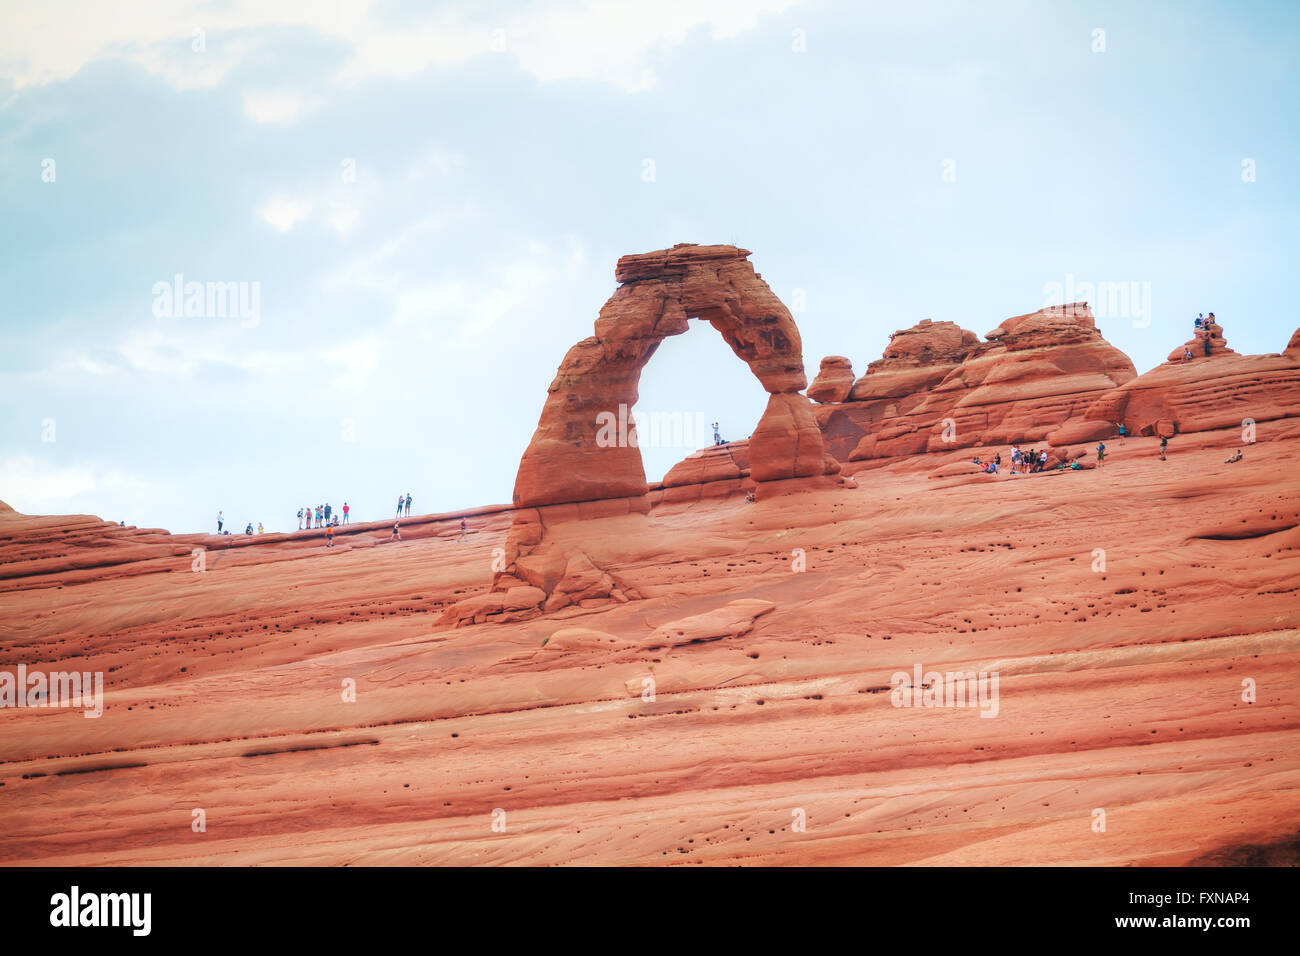 MOAB, UT, USA - AUGUST 22: Delicate Arch at the Arches National park on August 22, 2015 near Moab, UT, USA. Stock Photo